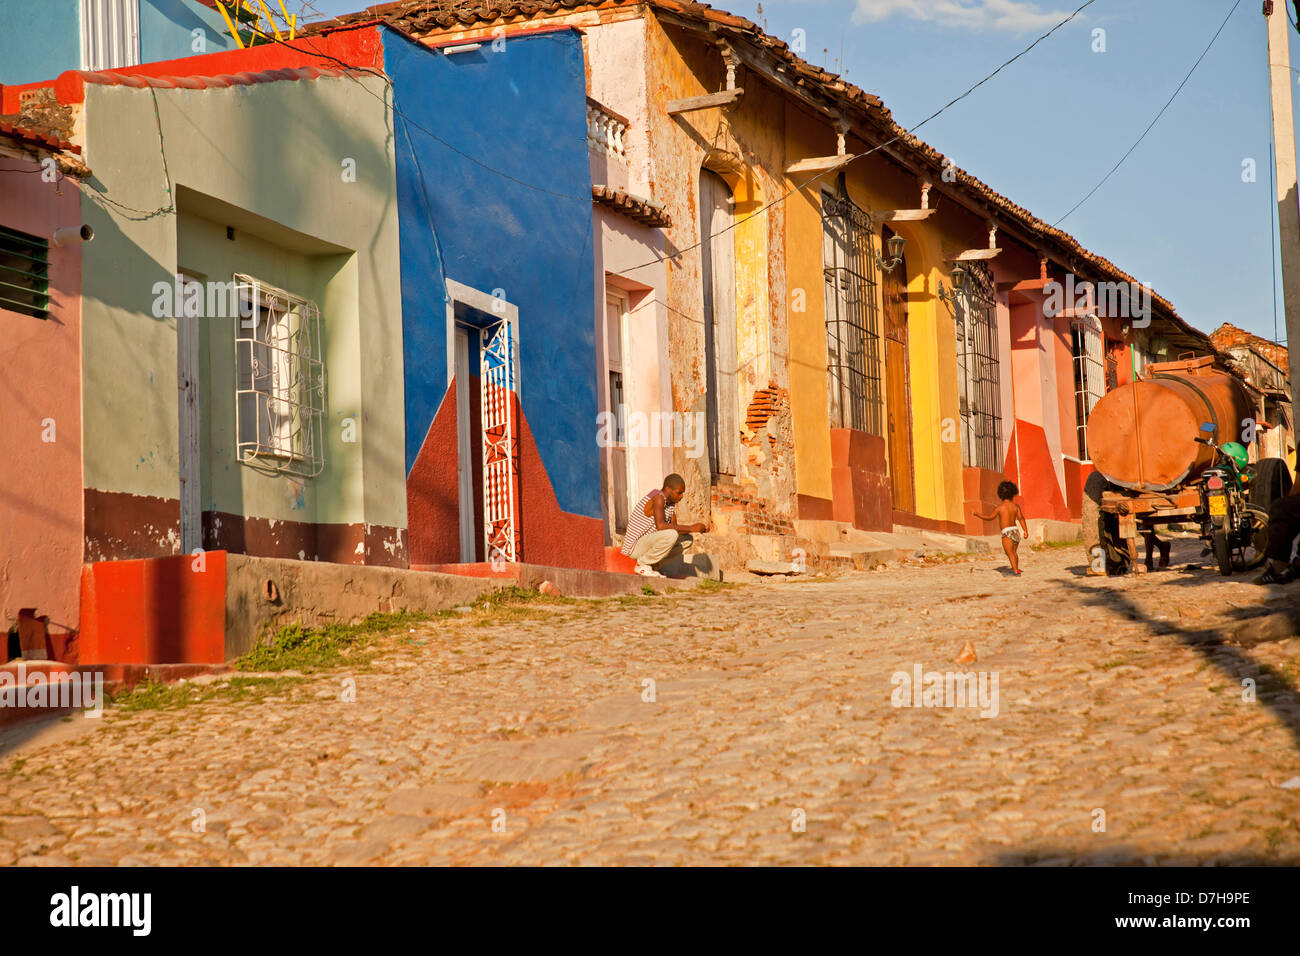 typical cobblestone street with colourful homes in the old town of Trinidad, Cuba, Caribbean Stock Photo